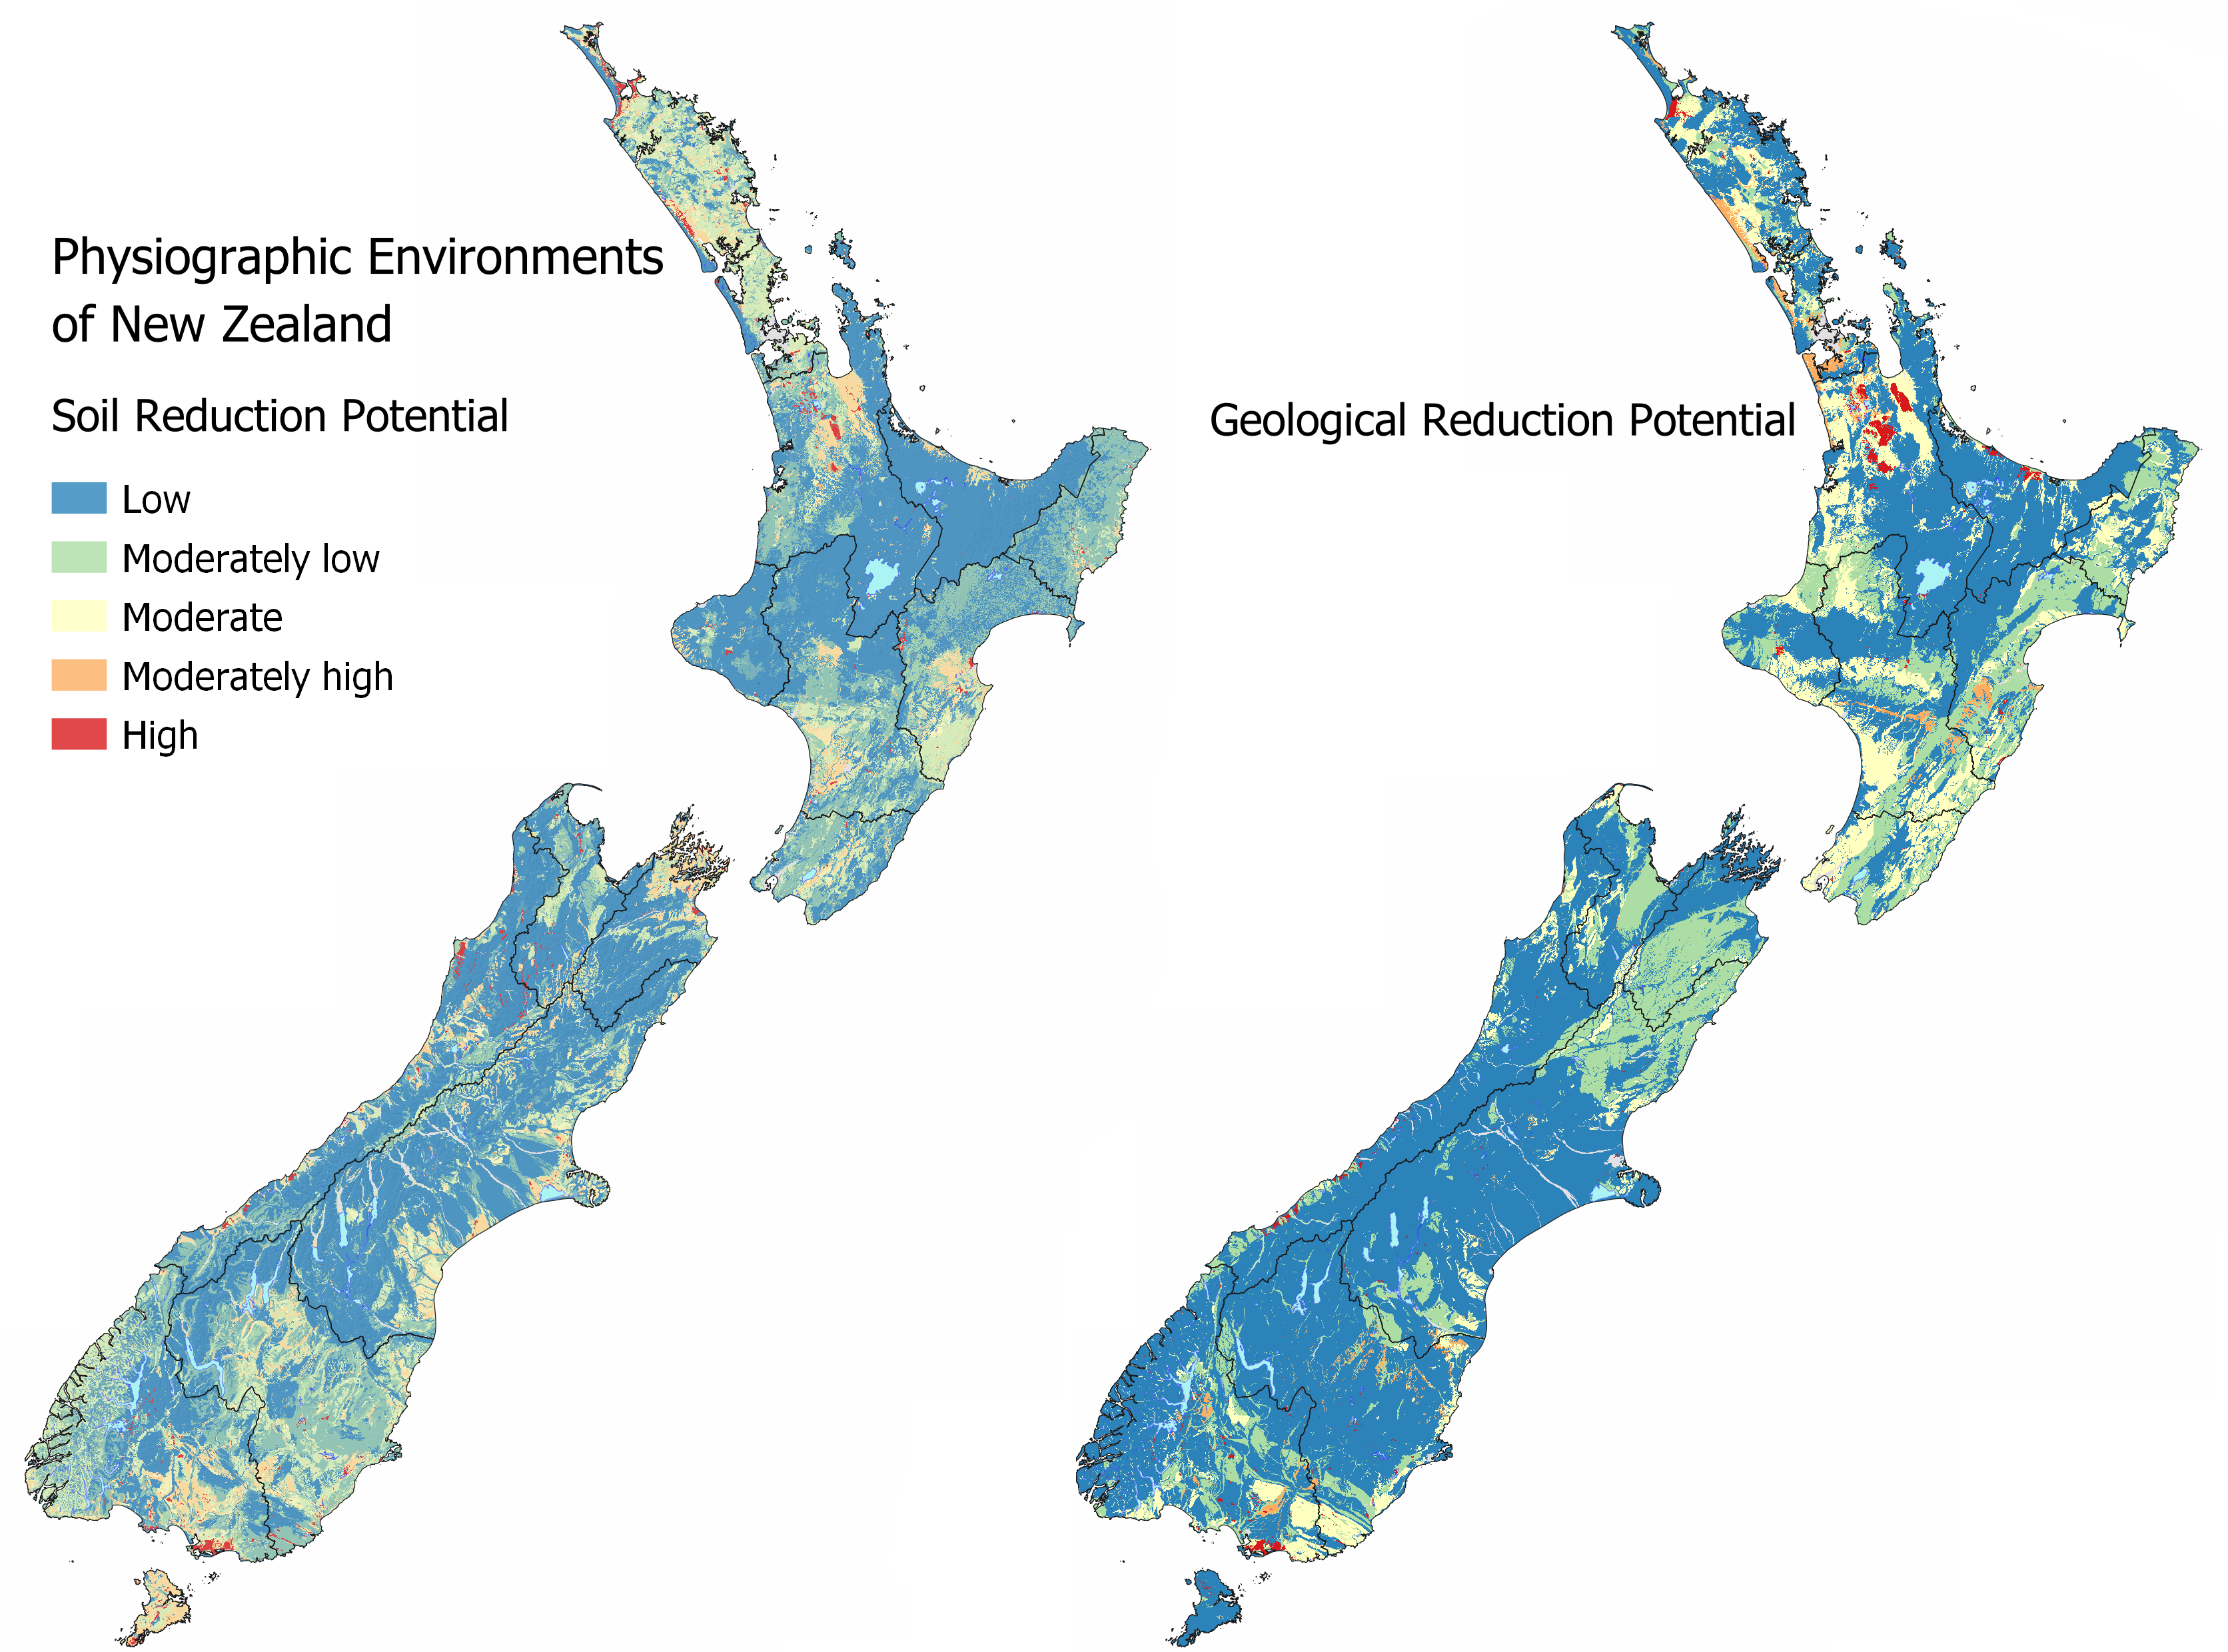 Two maps of New Zealand color coded to show the Soil Reduction Potential and Geological Reduction Potential.